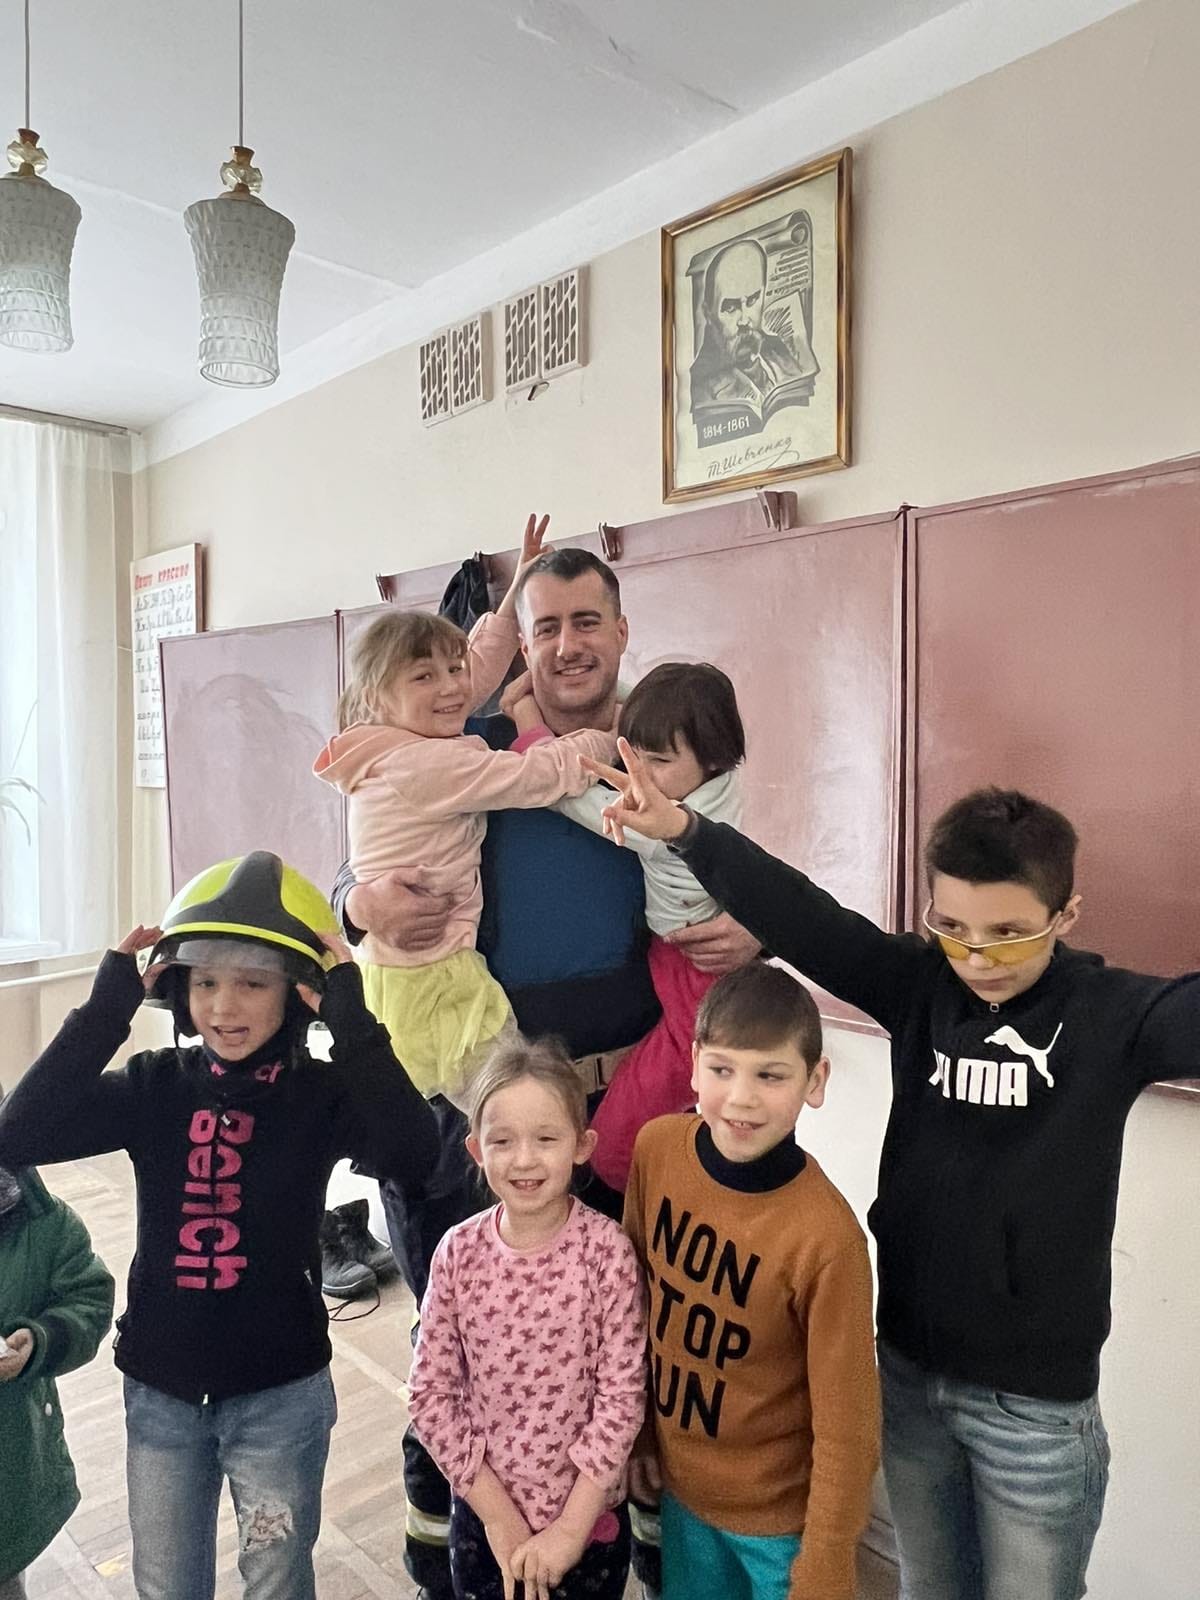 Andrew Laste pictured at an orphanage in Boyarka, which he supports